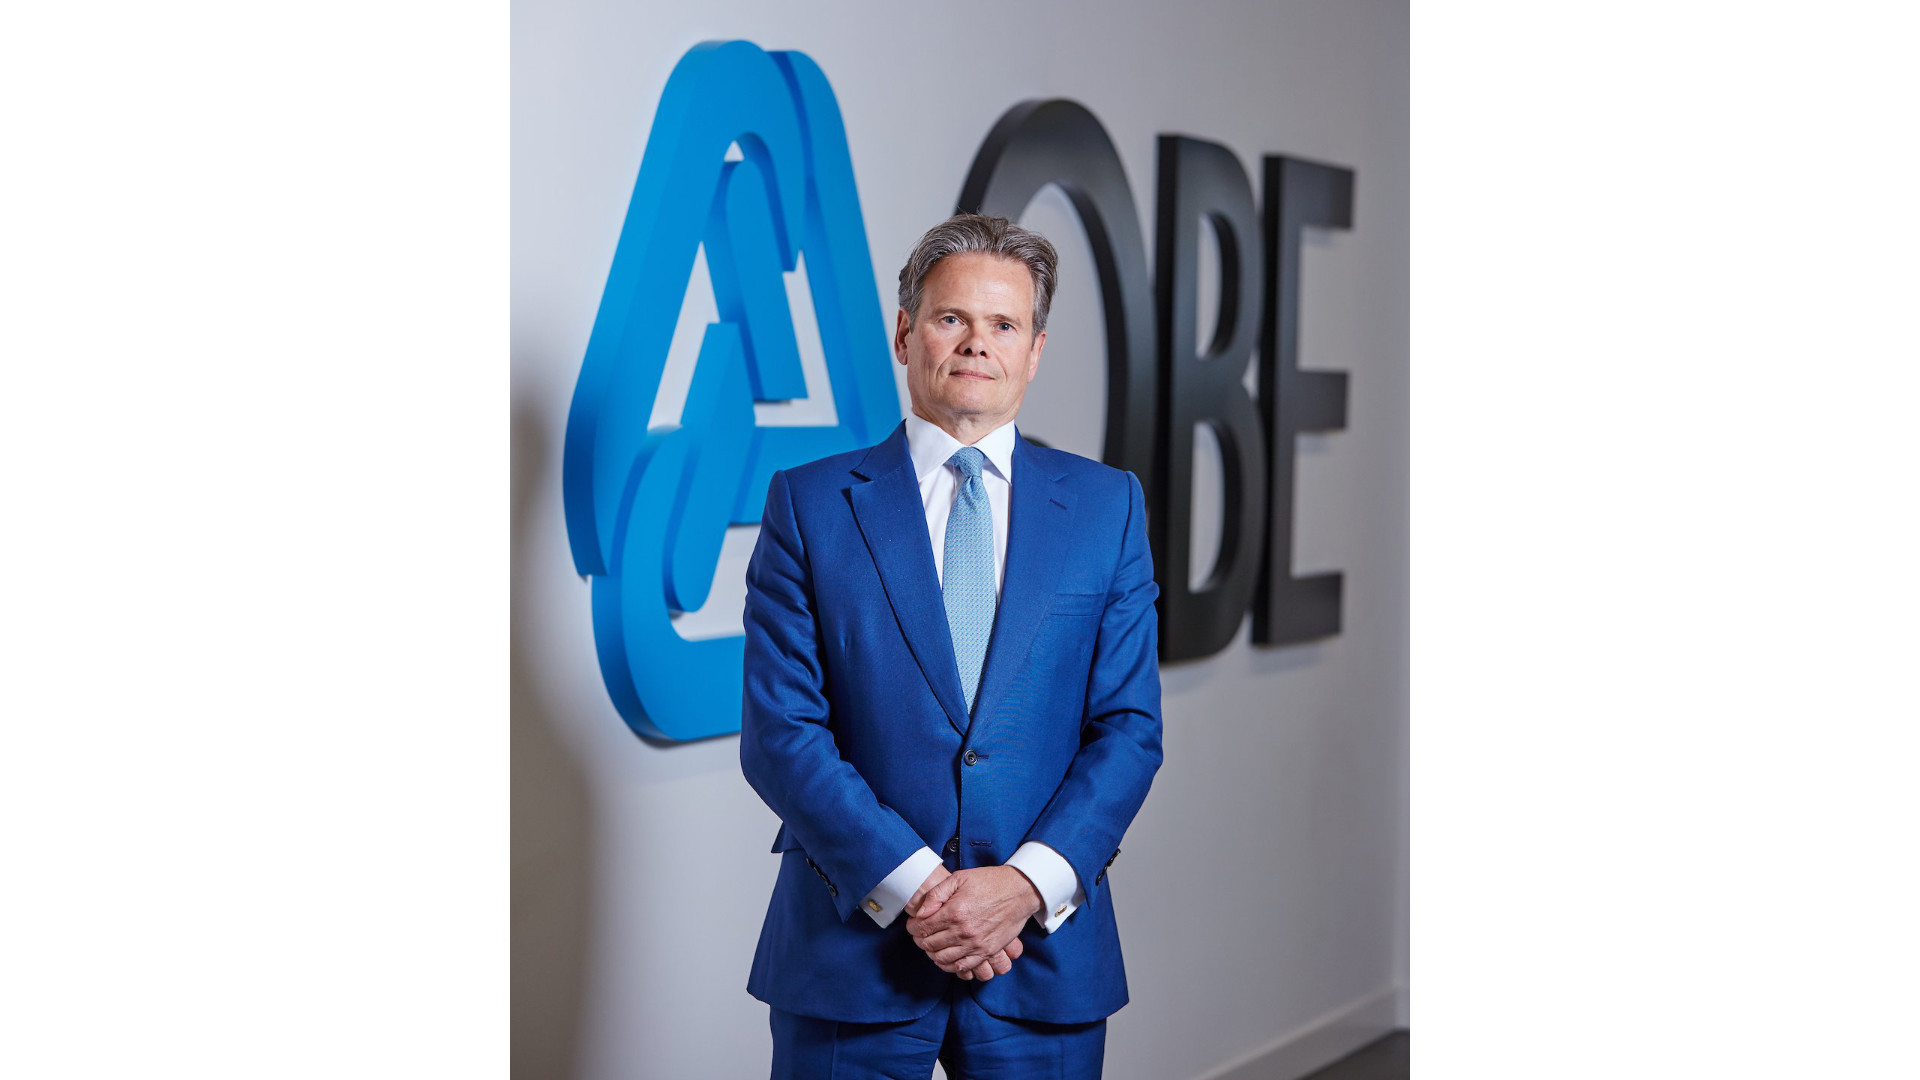 QBE 2020 Results-US$1.5b Loss, Dividend Suspended